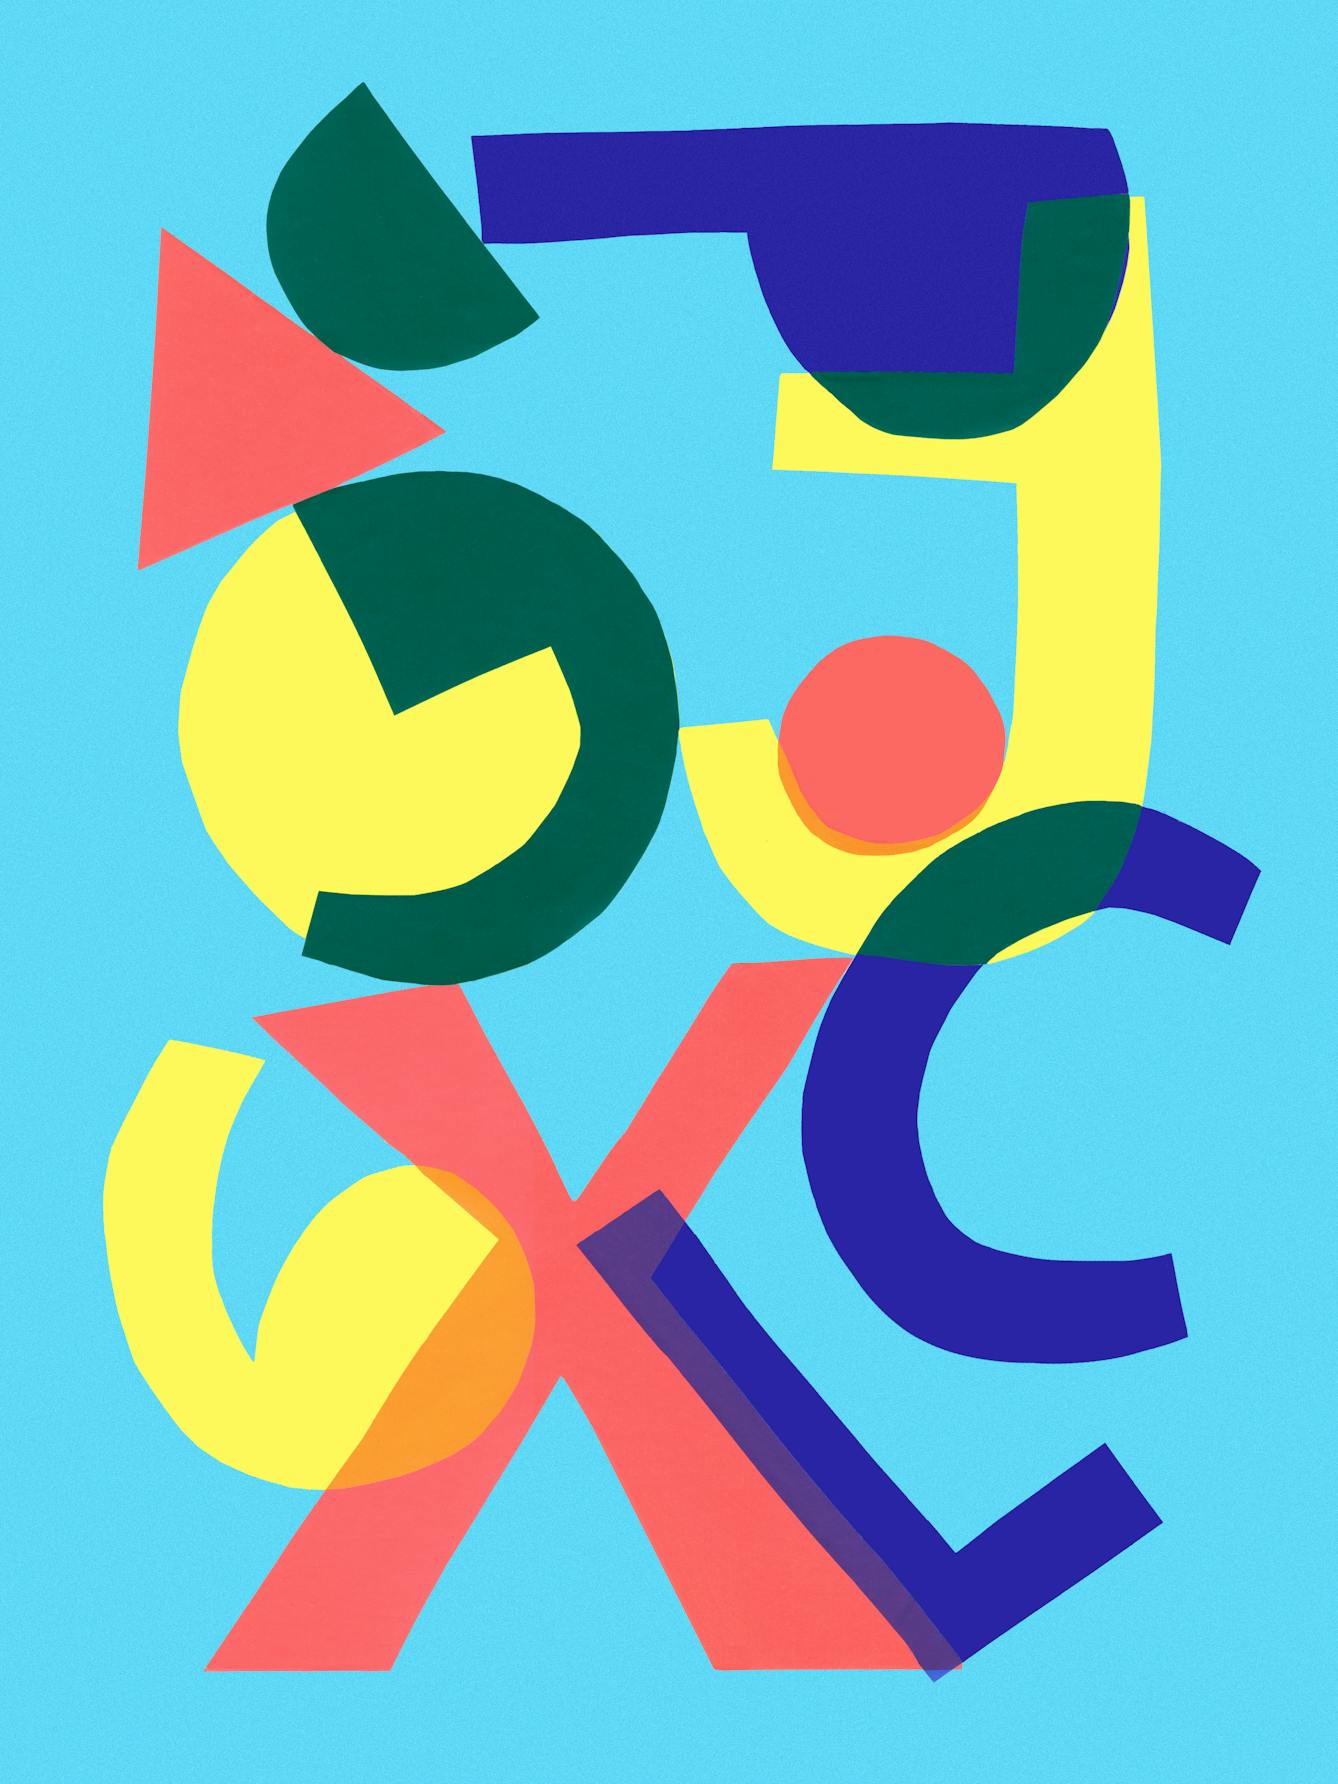 Abstract colourful artwork. The artwork has a light blue background with abstract letters and numbers scattered across it. The shapes and letters are in a variety of bright colours: yellow, pink, blue and green. The shapes and letters intersect and blur into one another. 